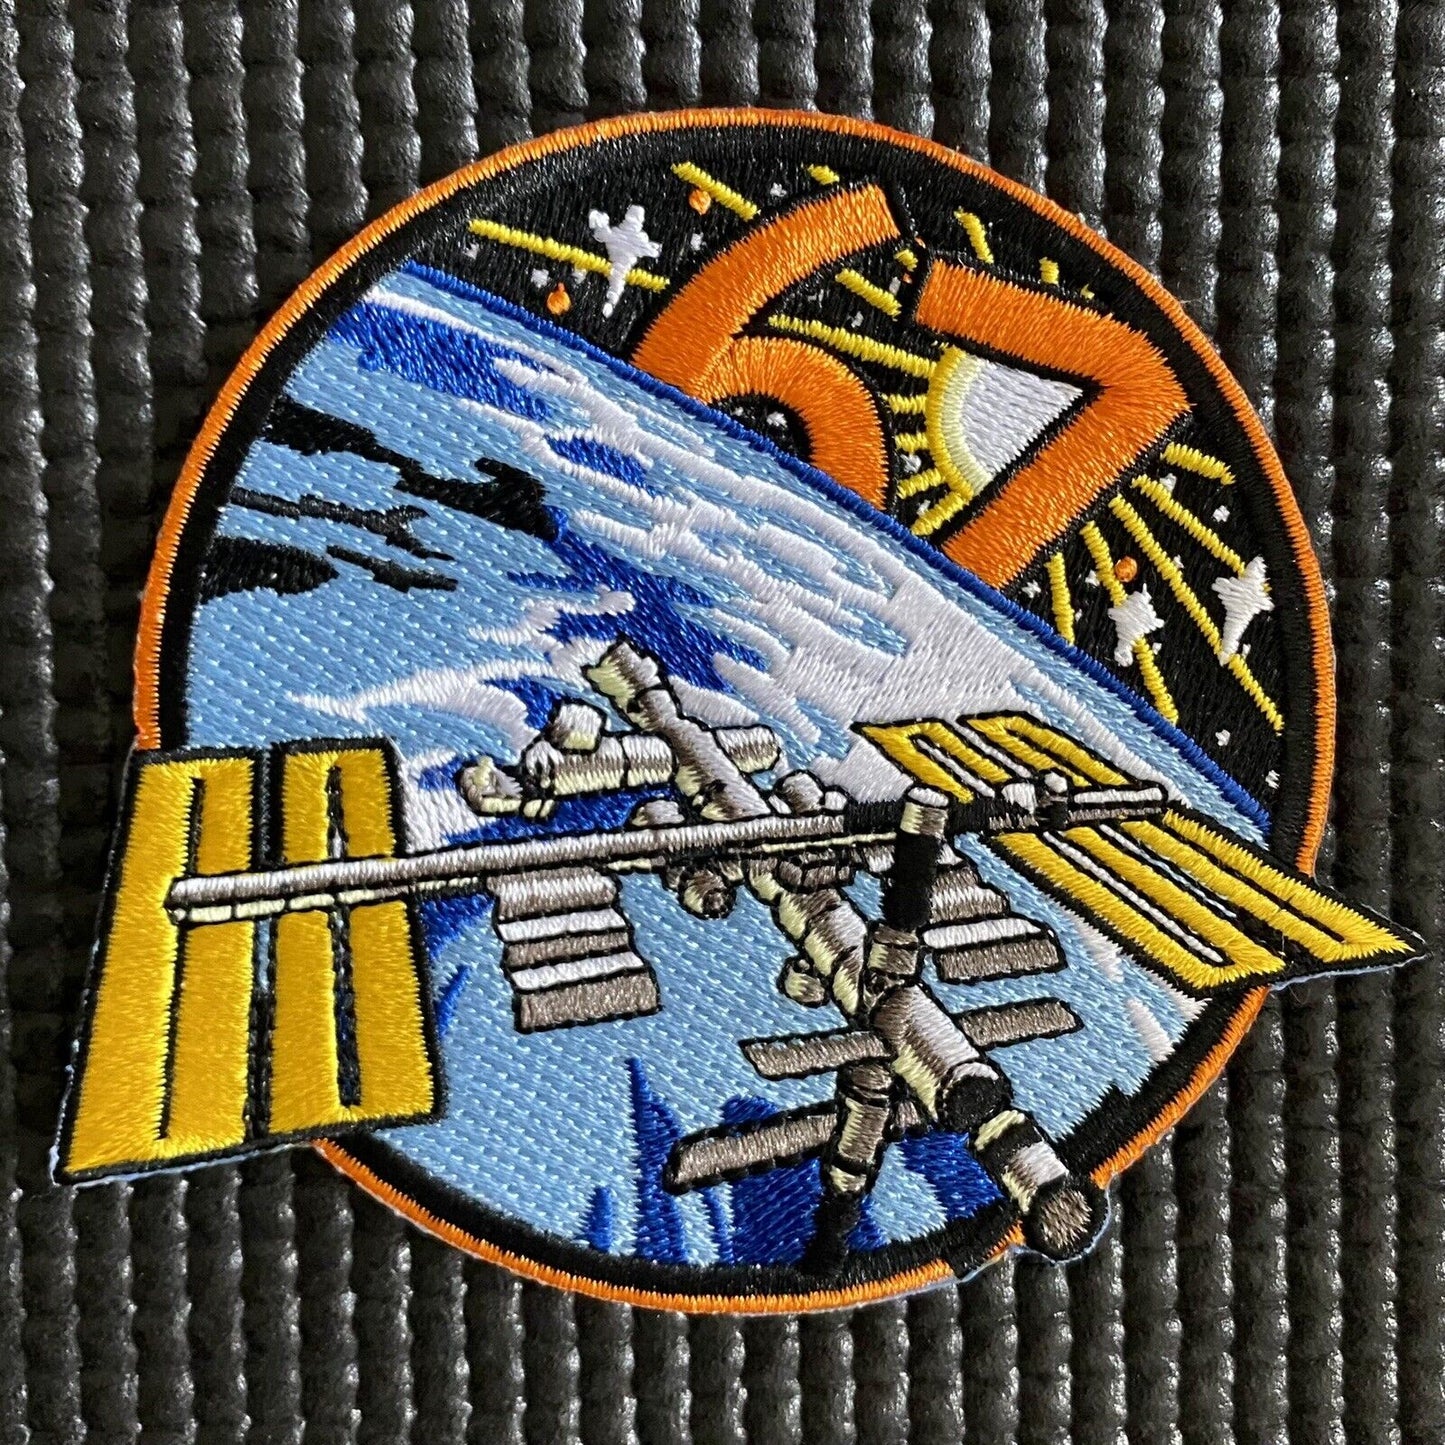 NASA EXPEDITION 67 - INTERNATIONAL SPACE STATION ASTRONAUT MISSION PATCH - 3.5”